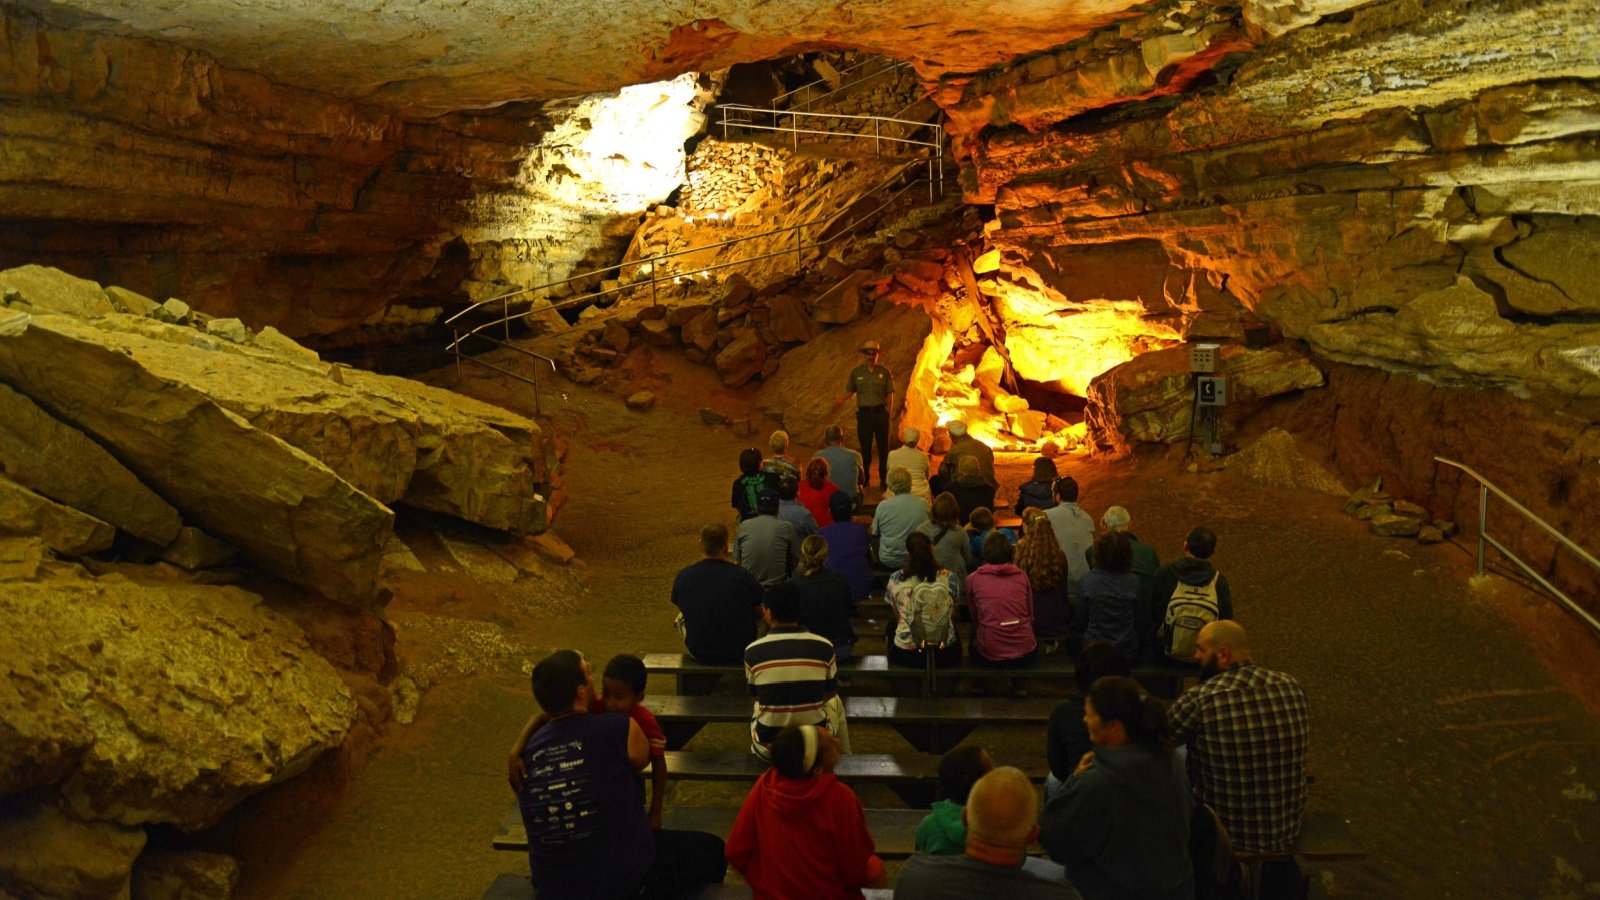 <p>For adventurous families, Louisville Mega Cavern offers a wide range of outdoor activities, such as zip lining underground (the only one in the world), an aerial ropes course, and a mega-tram tour. The former limestone mine is family-friendly, and although not the cheapest activity on the list, it’s one the family won’t forget.</p>